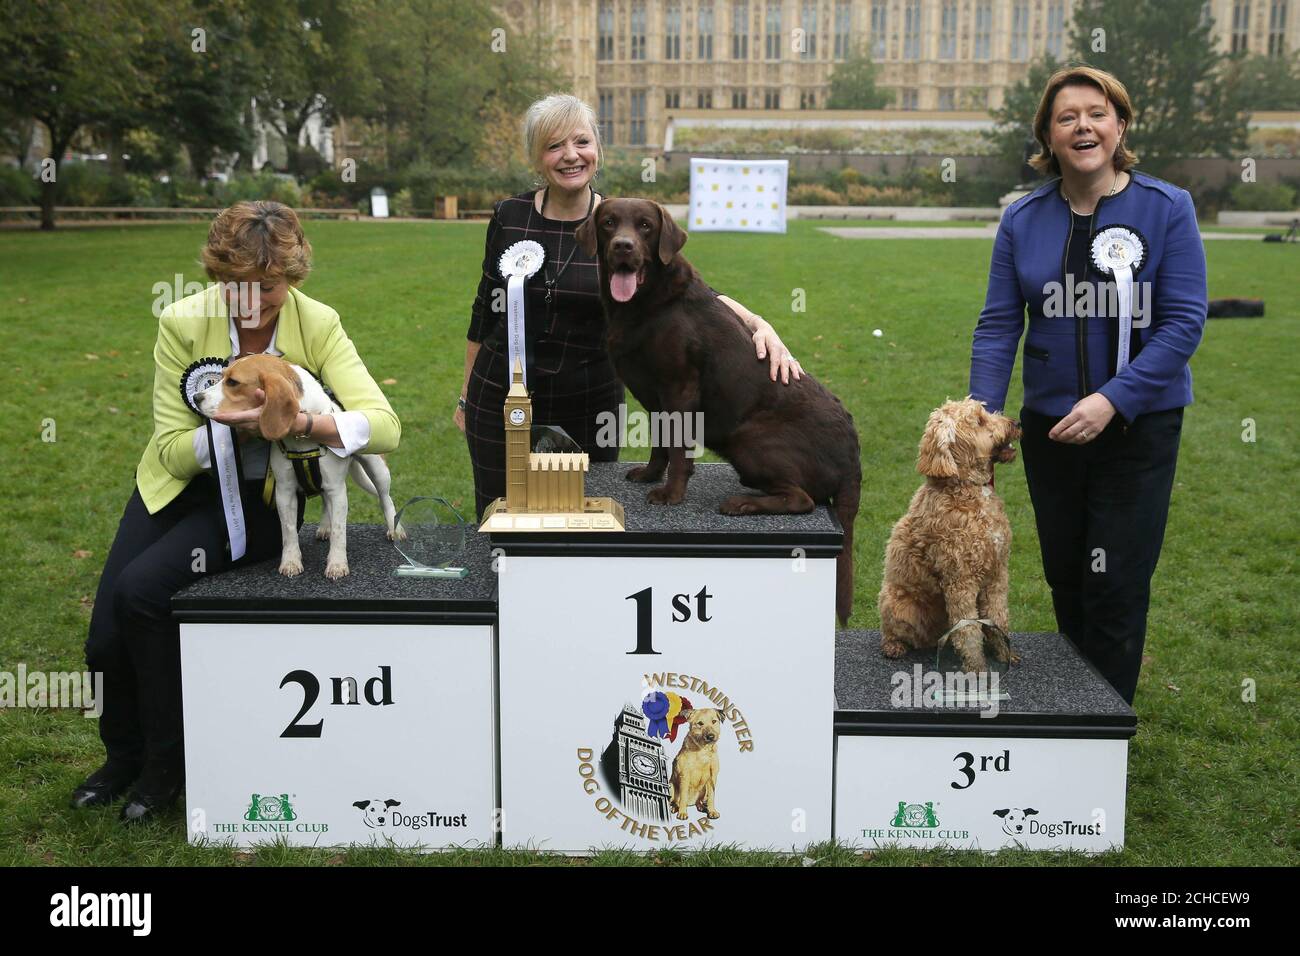 Tracy Brabin, MP for Batley and Spen with Labrador Rocky (centre) is announced as winner of the 25th Westminster Dog of the Year competition, with second placed Rebecca Pow with Dogs Trust rescue dog Beagle Bonnie (left), and third place Maria Miller with Cocker Spaniel/Poodle cross Ted at the end of the competition organised jointly by Dogs Trust and The Kennel Club, London. PRESS ASSOCIATION. Picture date: Thursday October 26th, 2017. The competition is open to all canines belonging to MPs and Lords and celebrates the special relationship between human and dog. Ten canines took part from Stock Photo